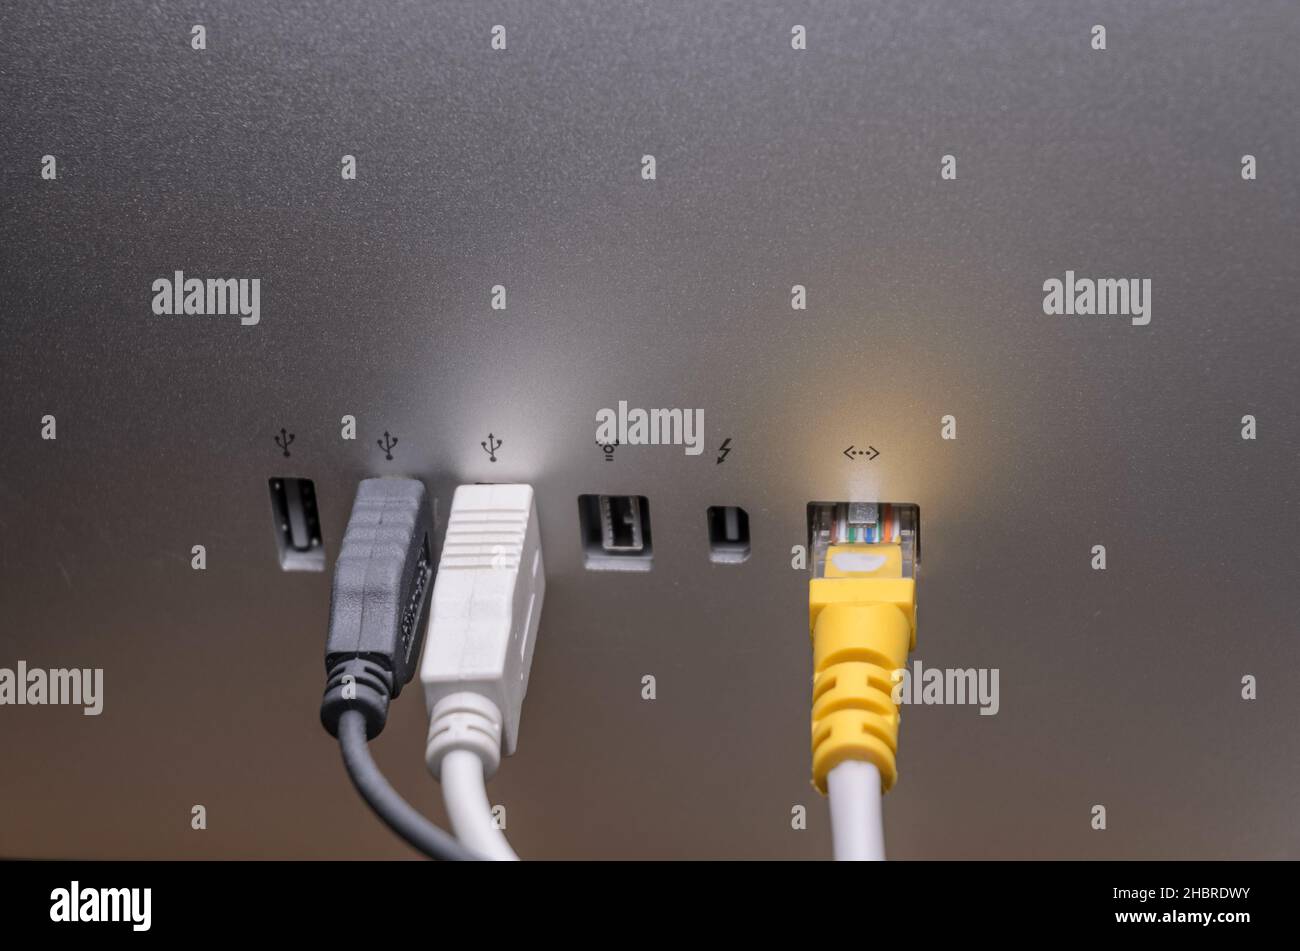 USB, Thunderbolt and Ethernet cables connected to ports on the back of an Apple Thunderbolt Display, close-up view Stock Photo